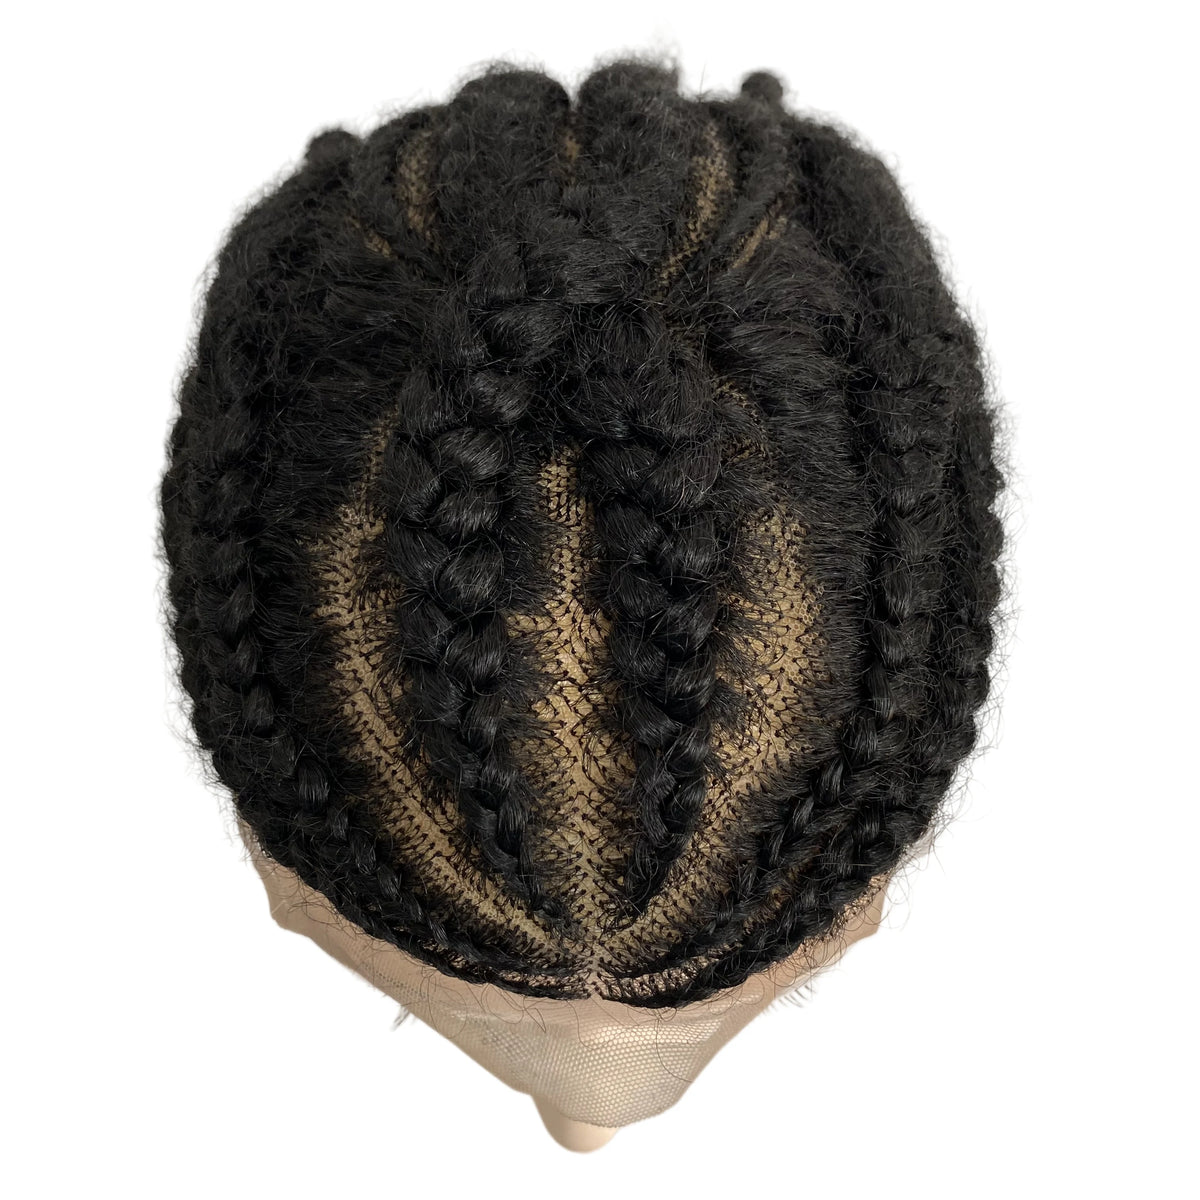 NO.8 Root Afro Corn Braids Full Lace Toupee for Men 8x10